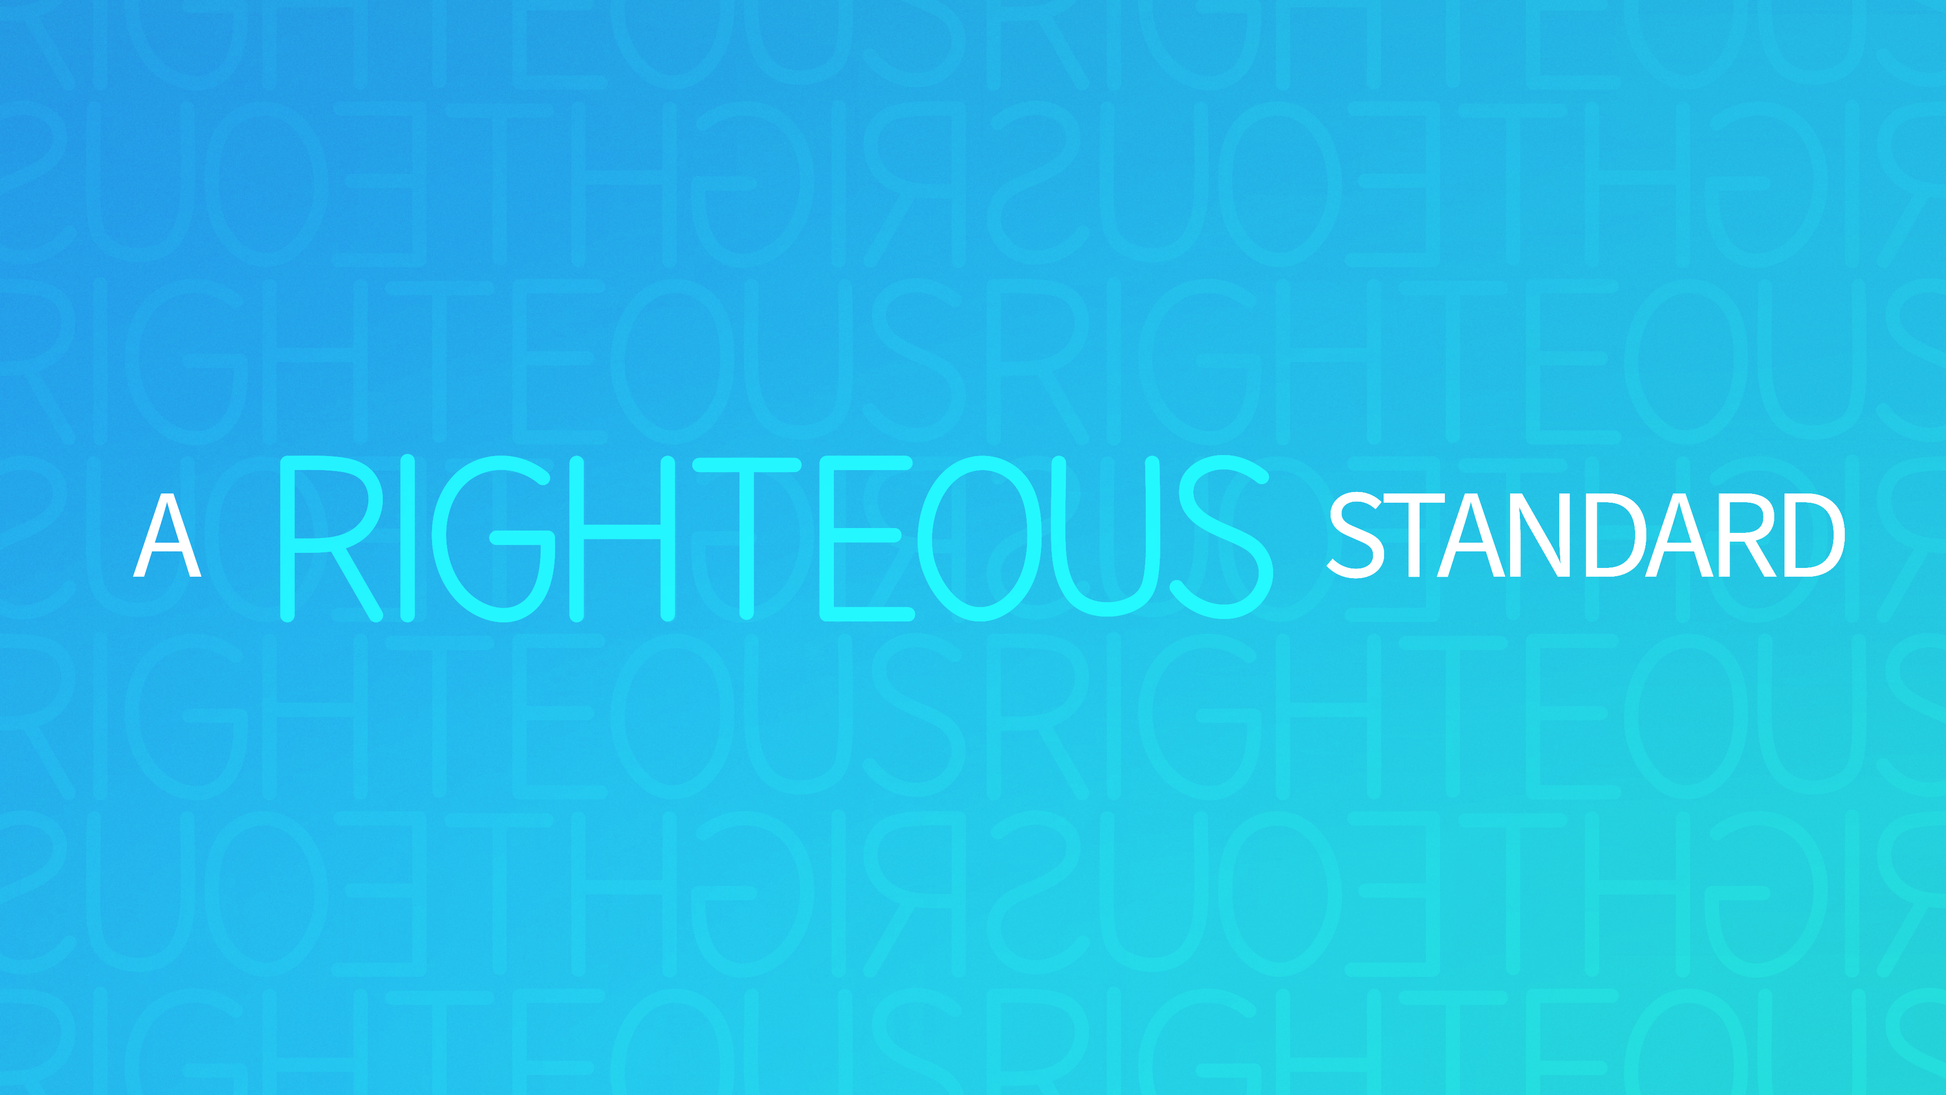 Sermon Graphic on A Righteous Standard